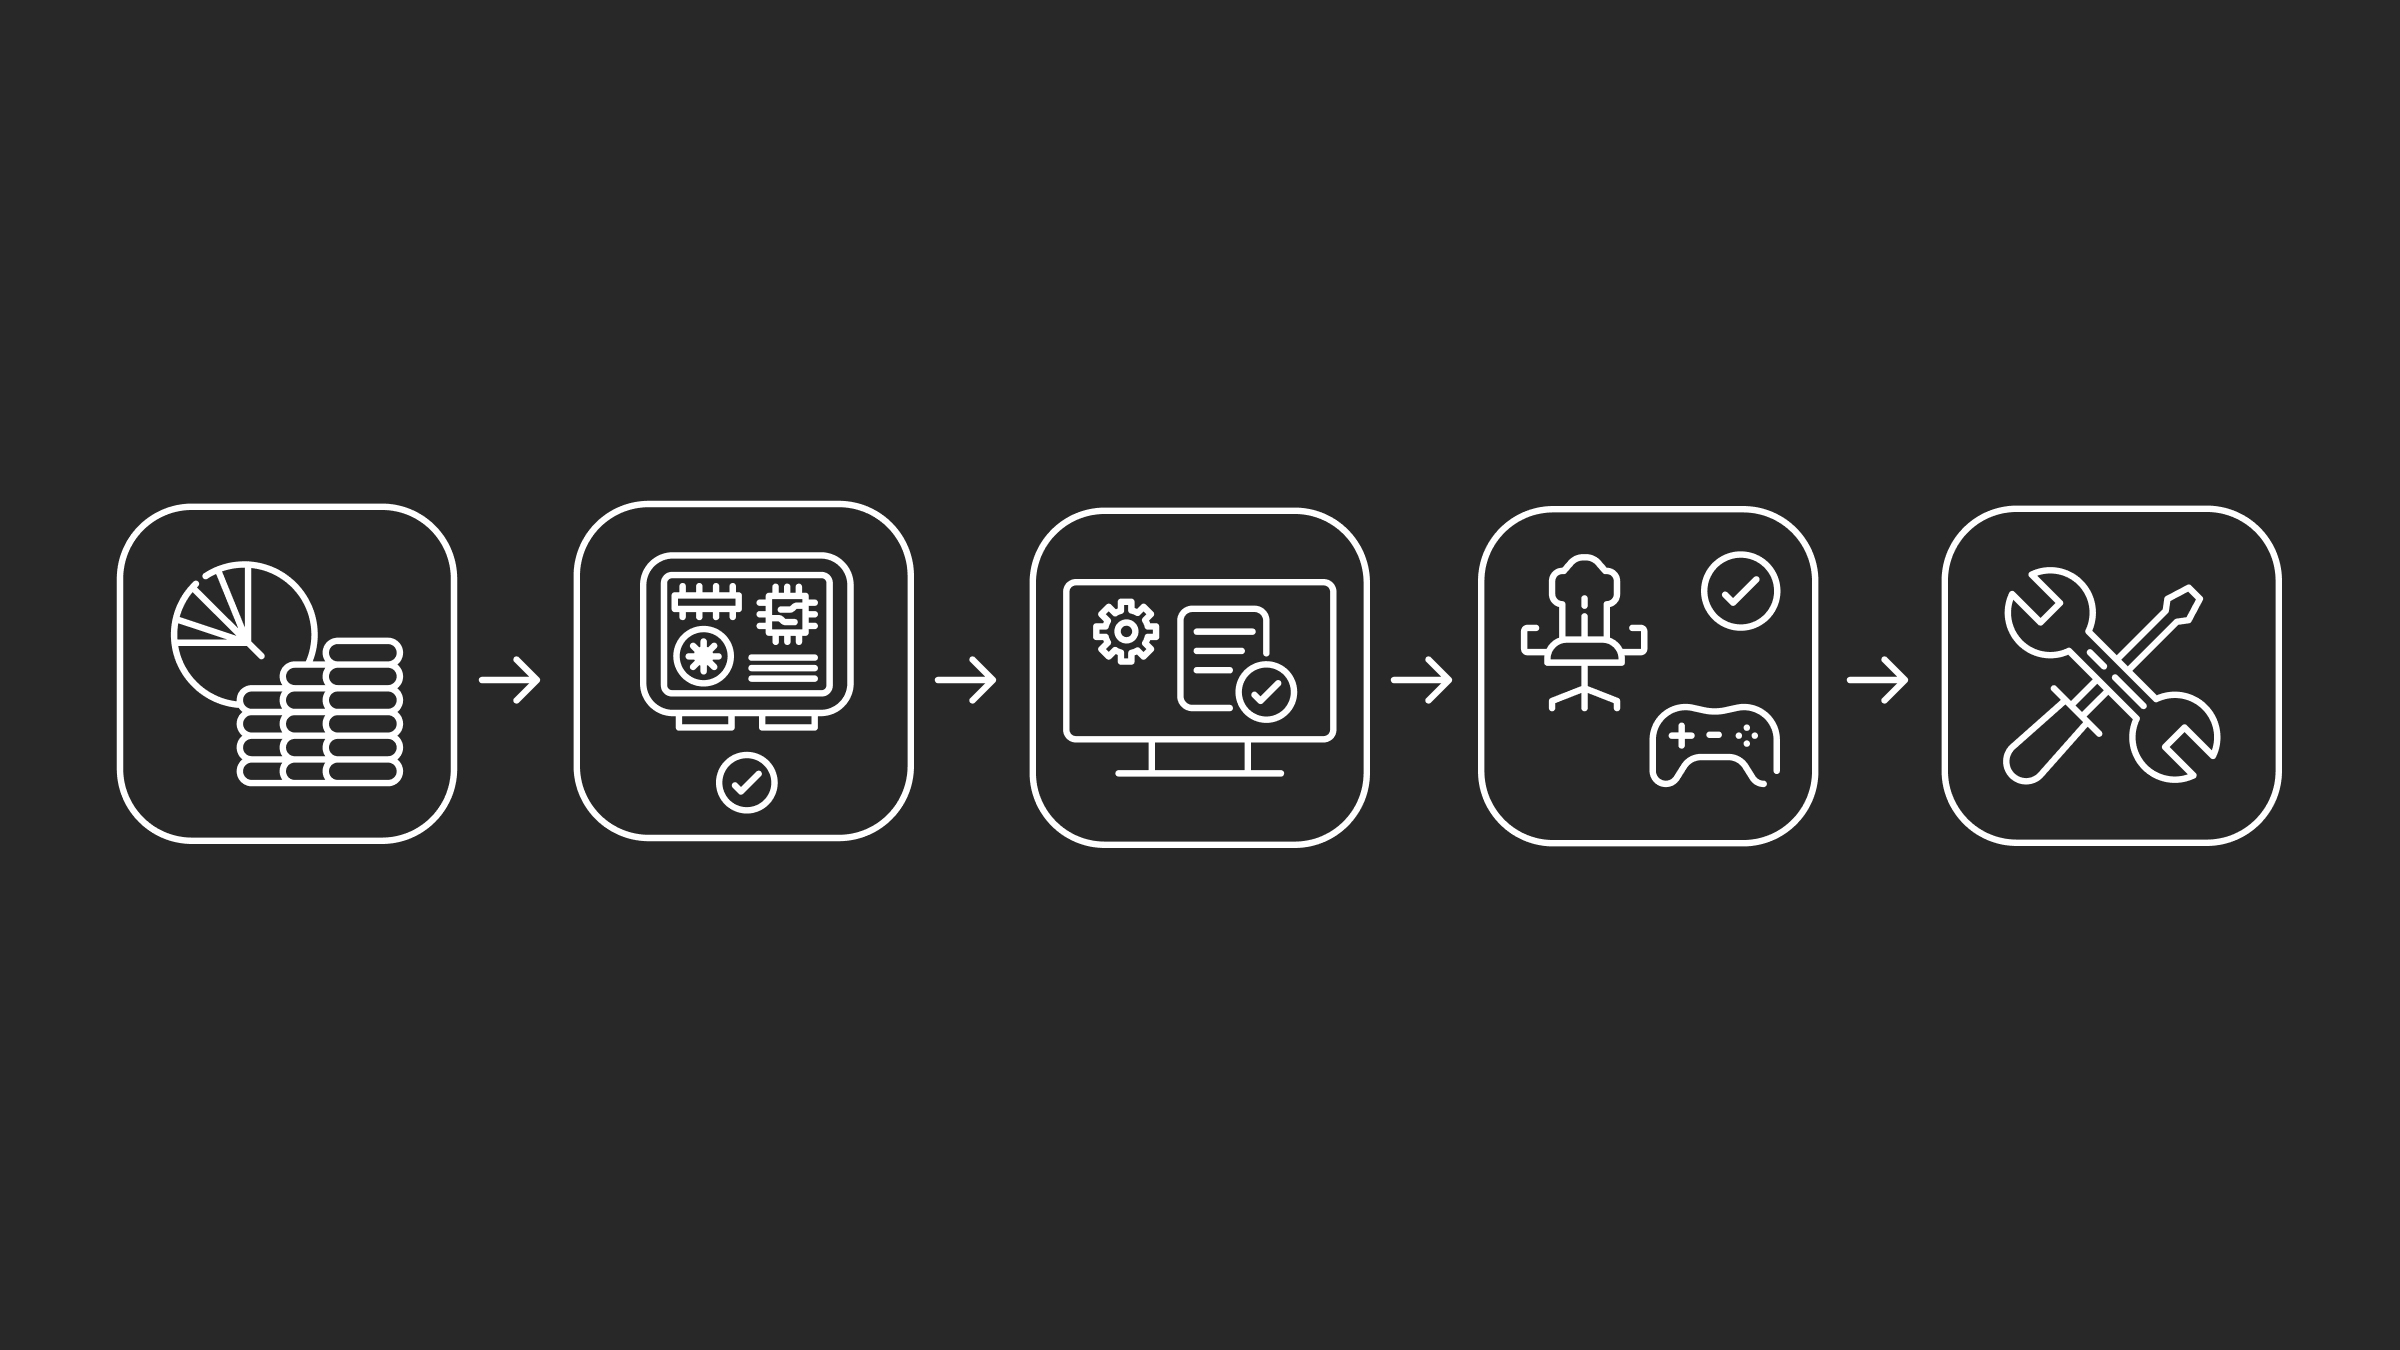 An infographic showing icons that showcase the process of creating a gaming setup.